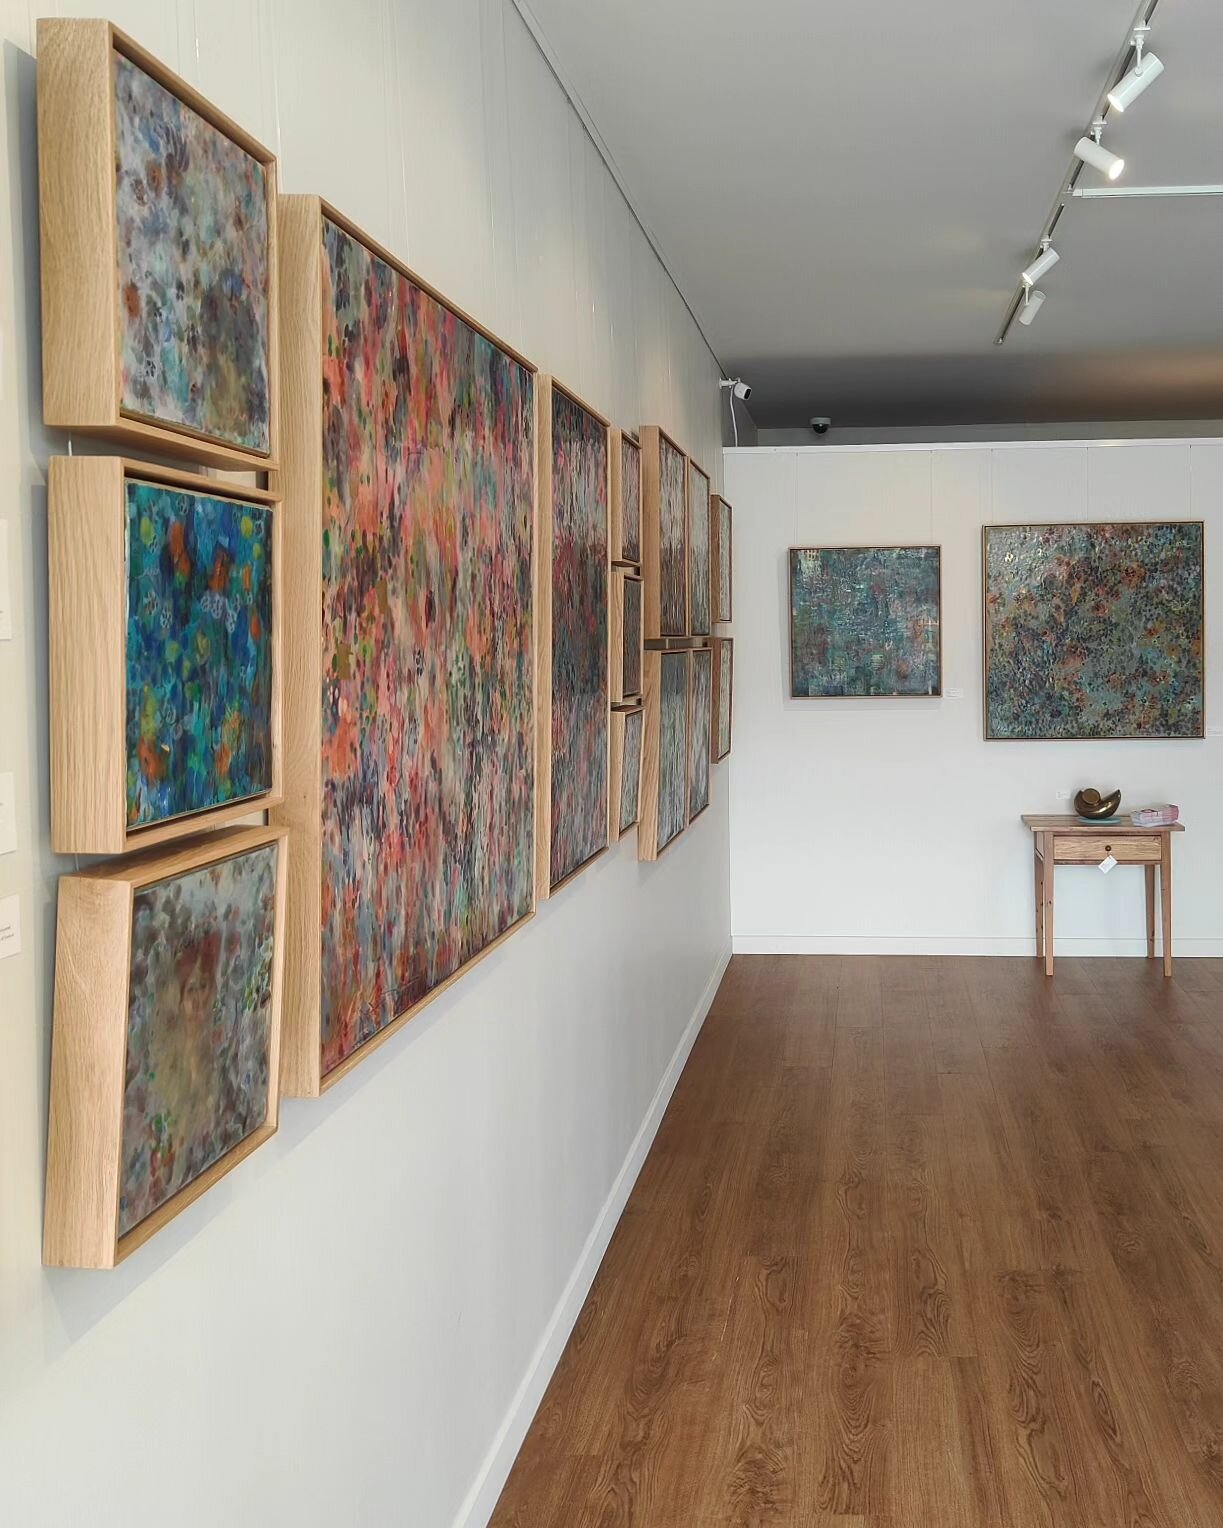 'Keen&rsquo;s Encaustic works fuse hundreds of strokes in molten wax to form impressions of &ldquo;floral fields&rdquo; and landscapes.'

Helen Keen - Depth of Fields.
Mitchell Studios until 30 March, 2024.
Open Tuesday to Sunday.
Khandallah, Welling